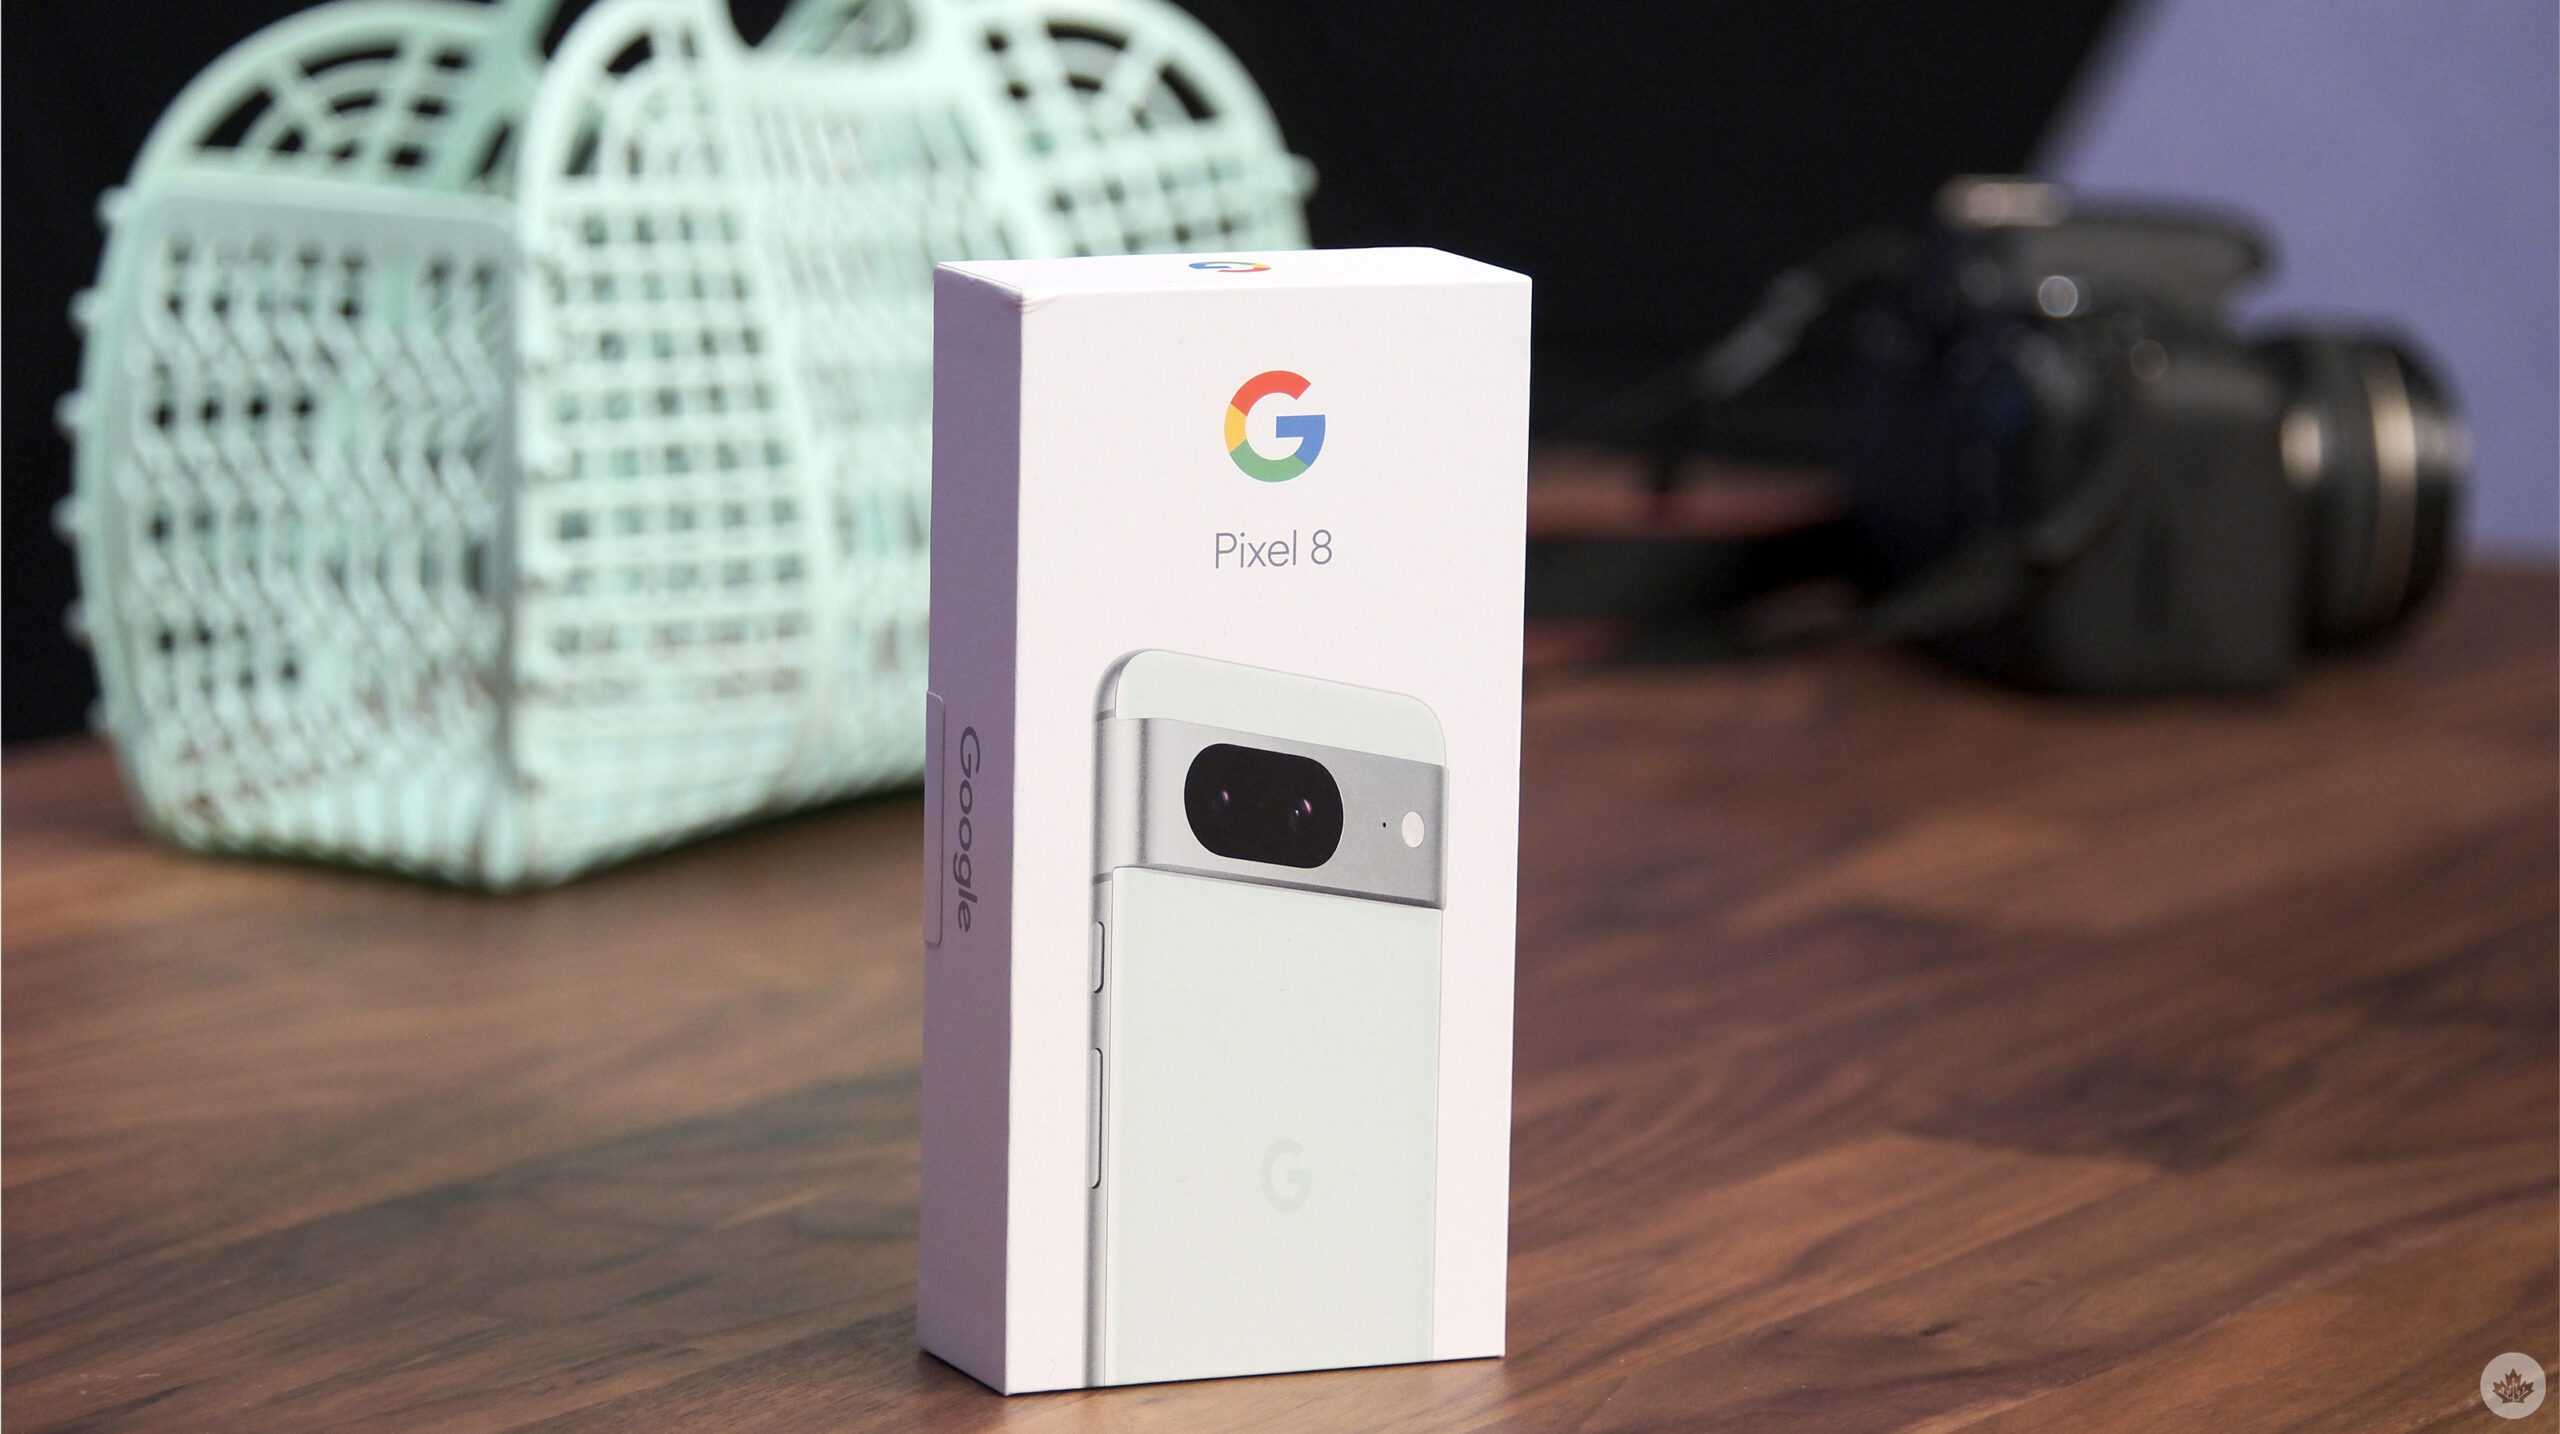 Win a ‘Mint’ Google Pixel 8 with MobileSyrup

(Note: The title is already in English; thus, no translation is needed. If you intended to have it rewritten for clarity or impact, here’s an alternative):

Enter to Win a ‘Mint Condition’ Google Pixel 8 from MobileSyrup